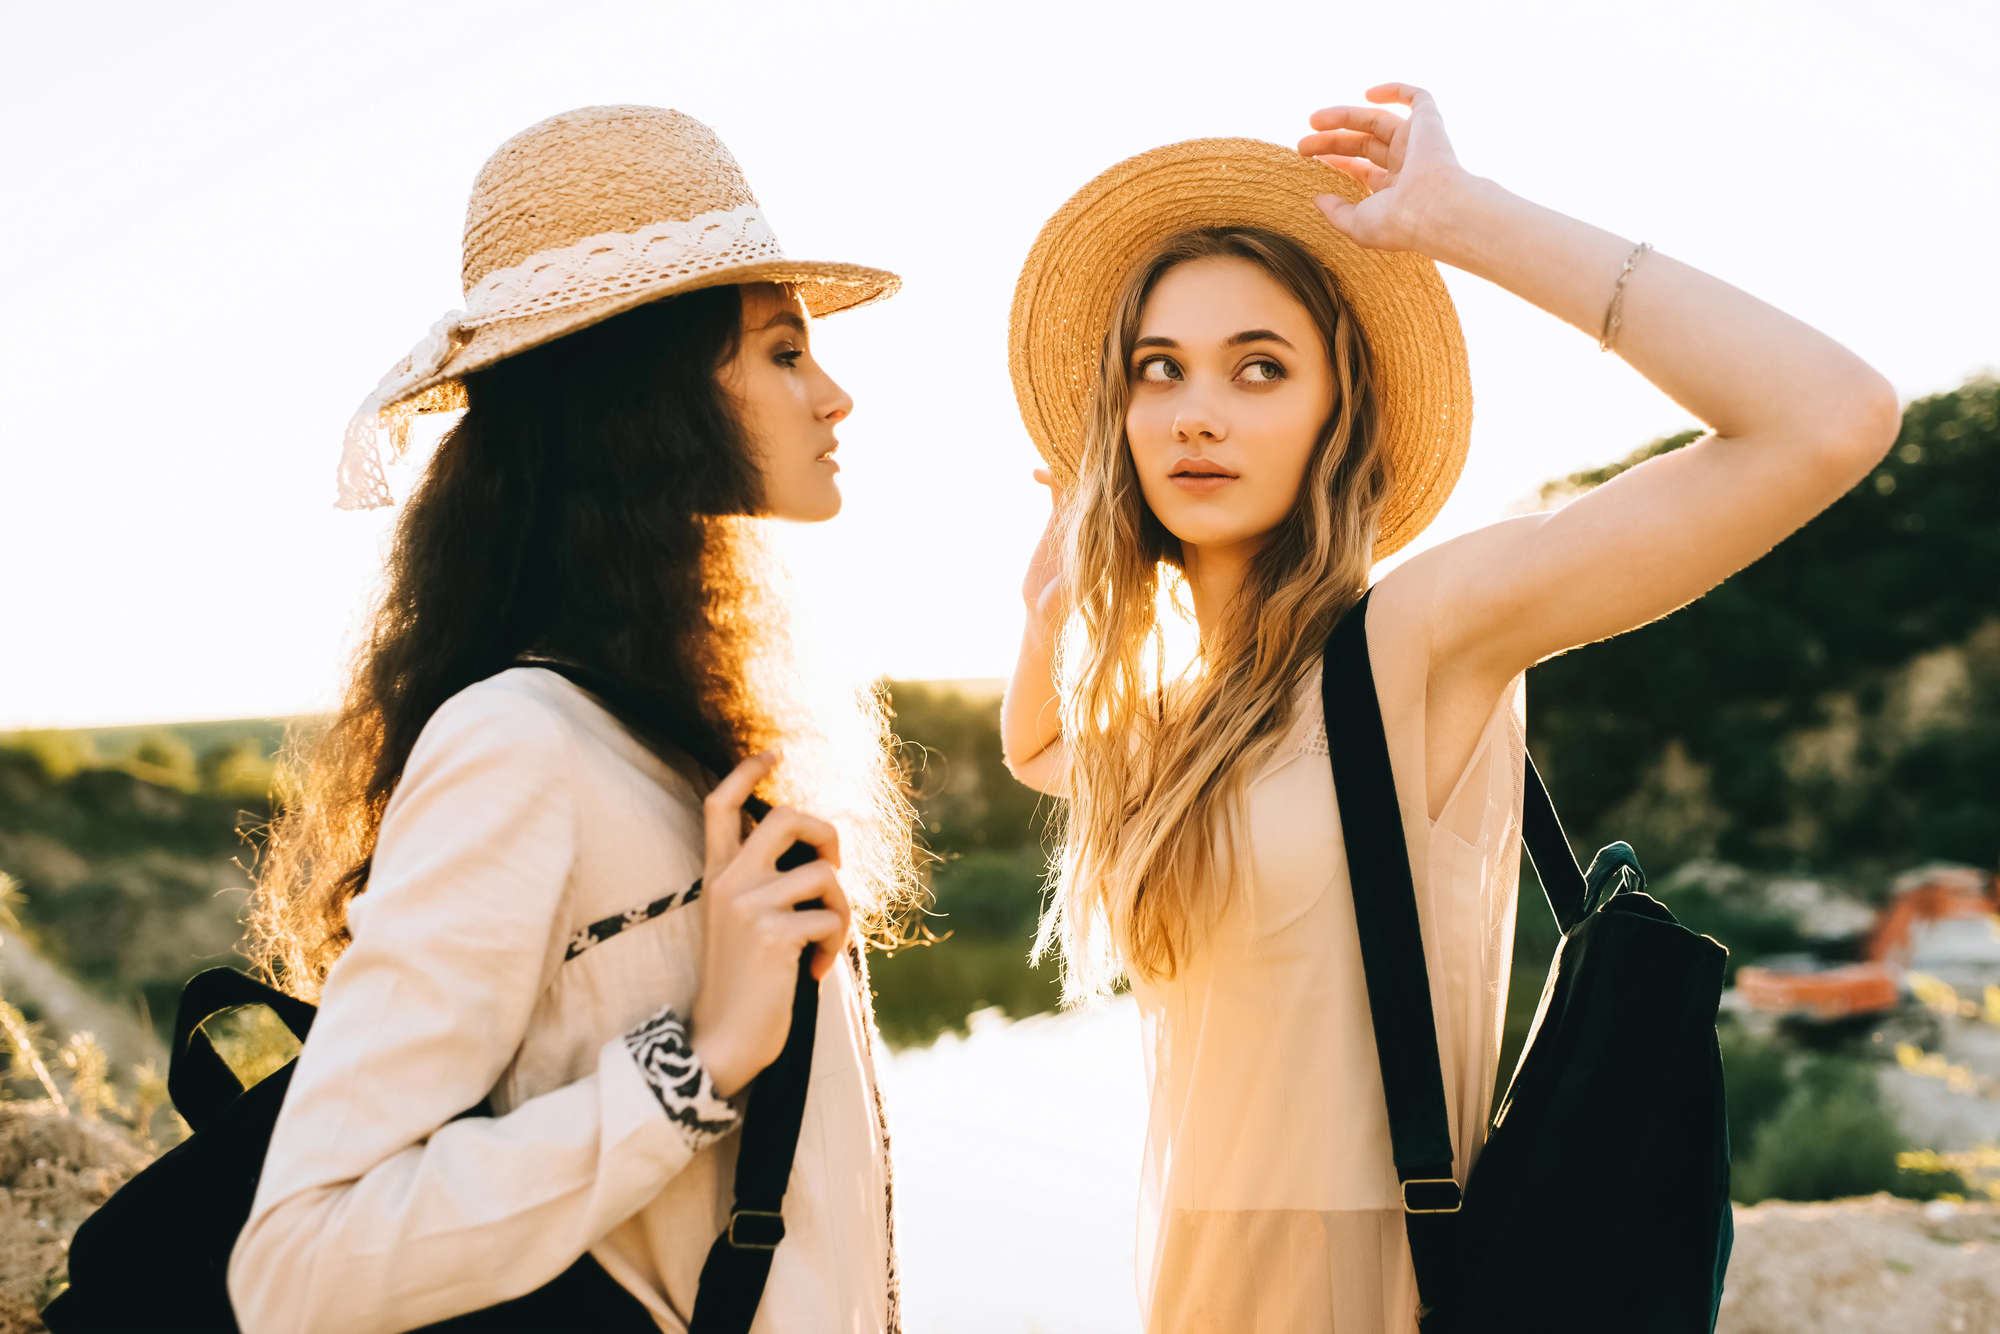 Two young women are standing outdoors, wearing straw hats and backpacks. They are dressed in light, summery clothing, with one adjusting her hat while looking to the side. The background is a scenic view with a bright, sunlit sky and natural surroundings.